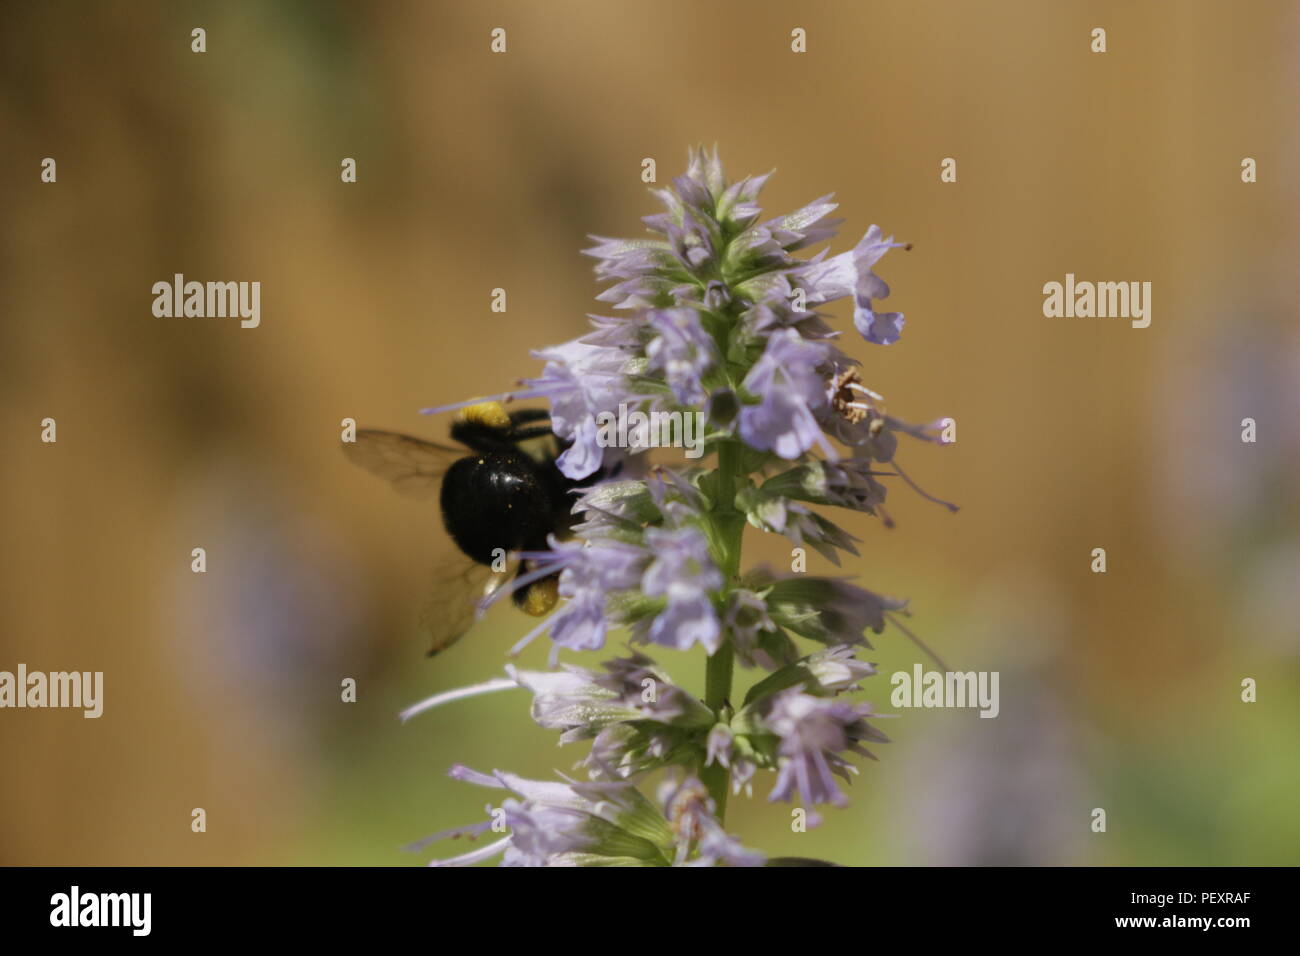 honey bee pollinating a licorice mint plant. Licorice mint is used for medicinal and other teas.. Stock Photo